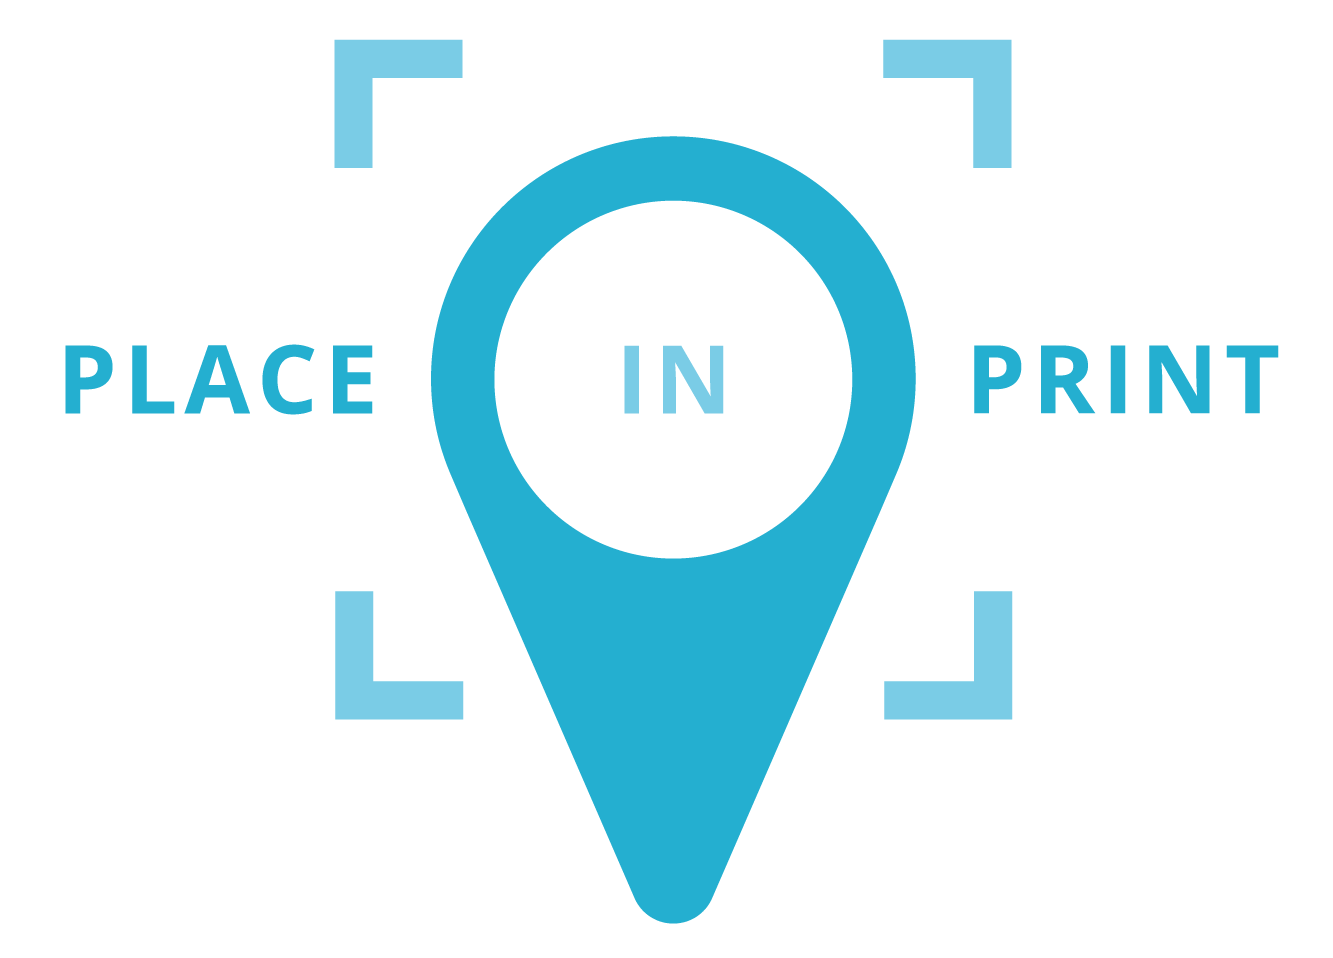 Place Clothing Logo - Dorking City Prints, Gifts, Homeware and Clothing. Place in Print